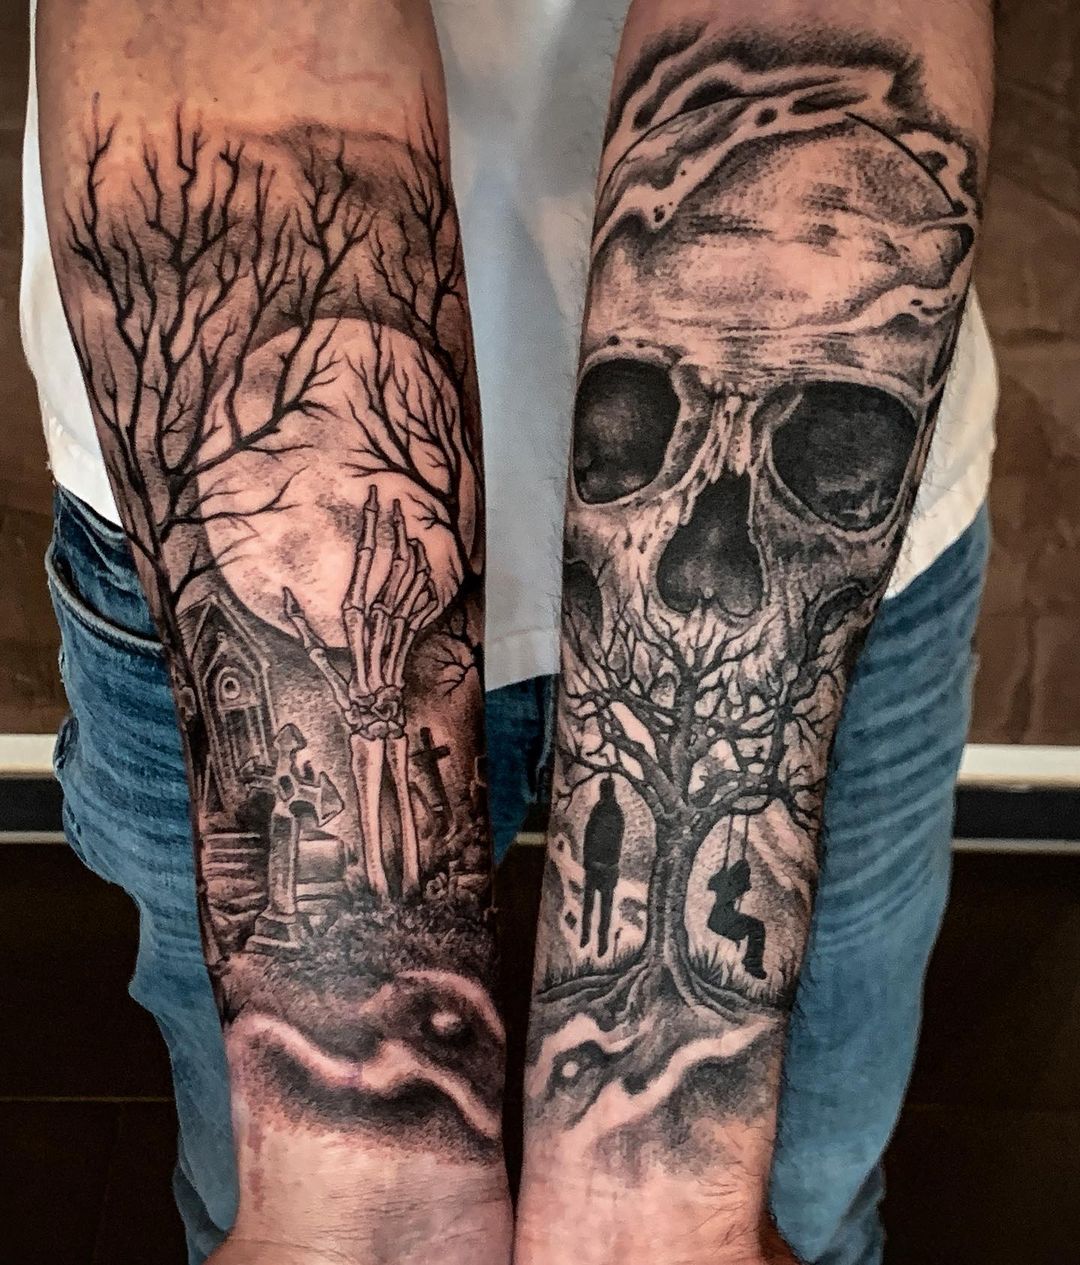 Early start of two new full sleeve projects.
.
Right arm fresh, left arm 6 weeks...